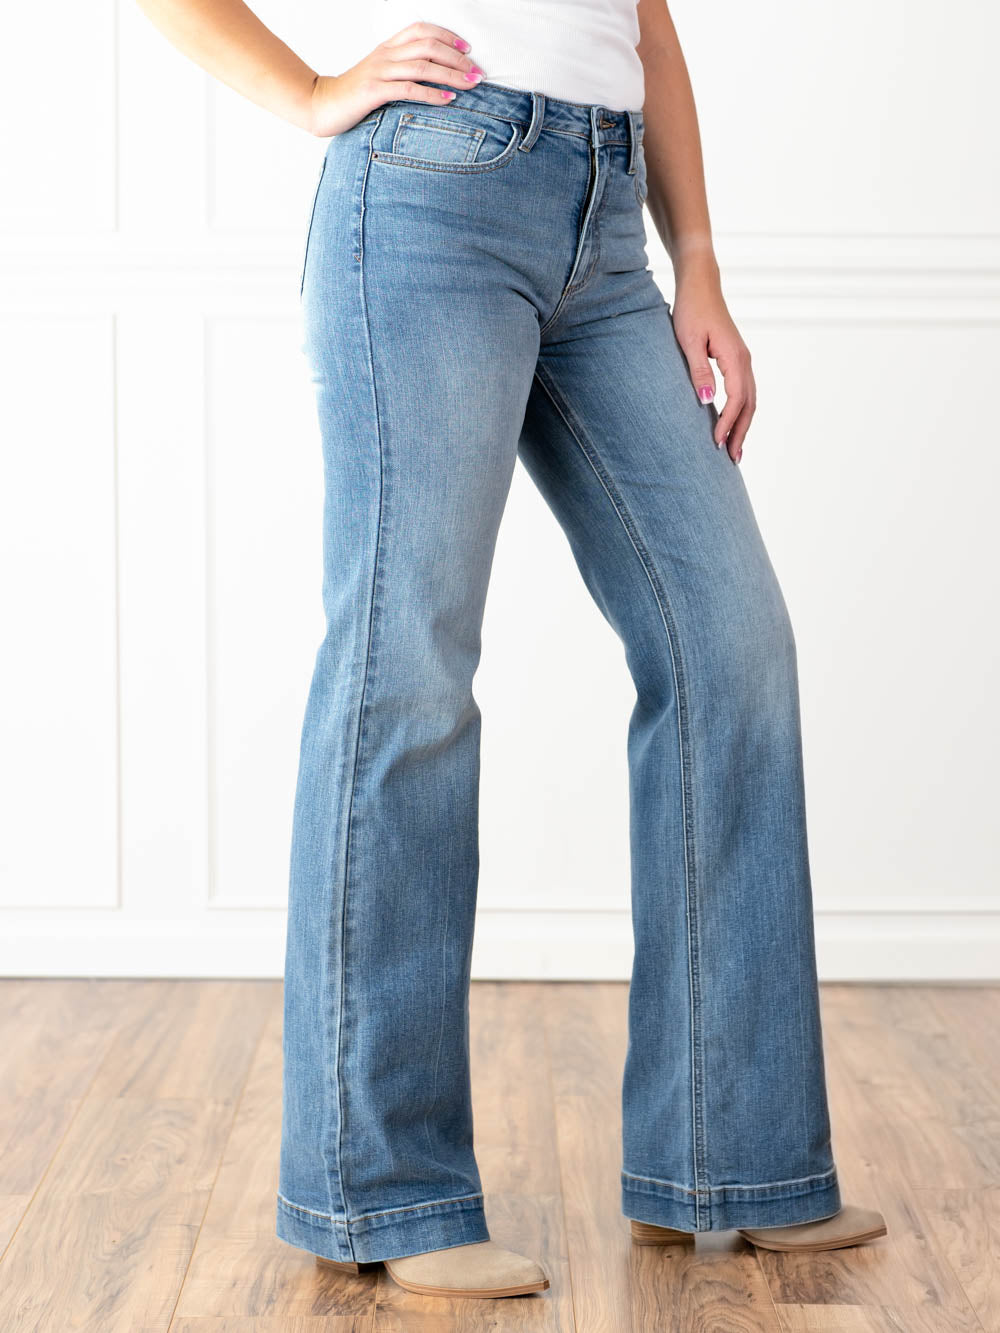 High Waisted Wide Leg Jeans for Tall Girls